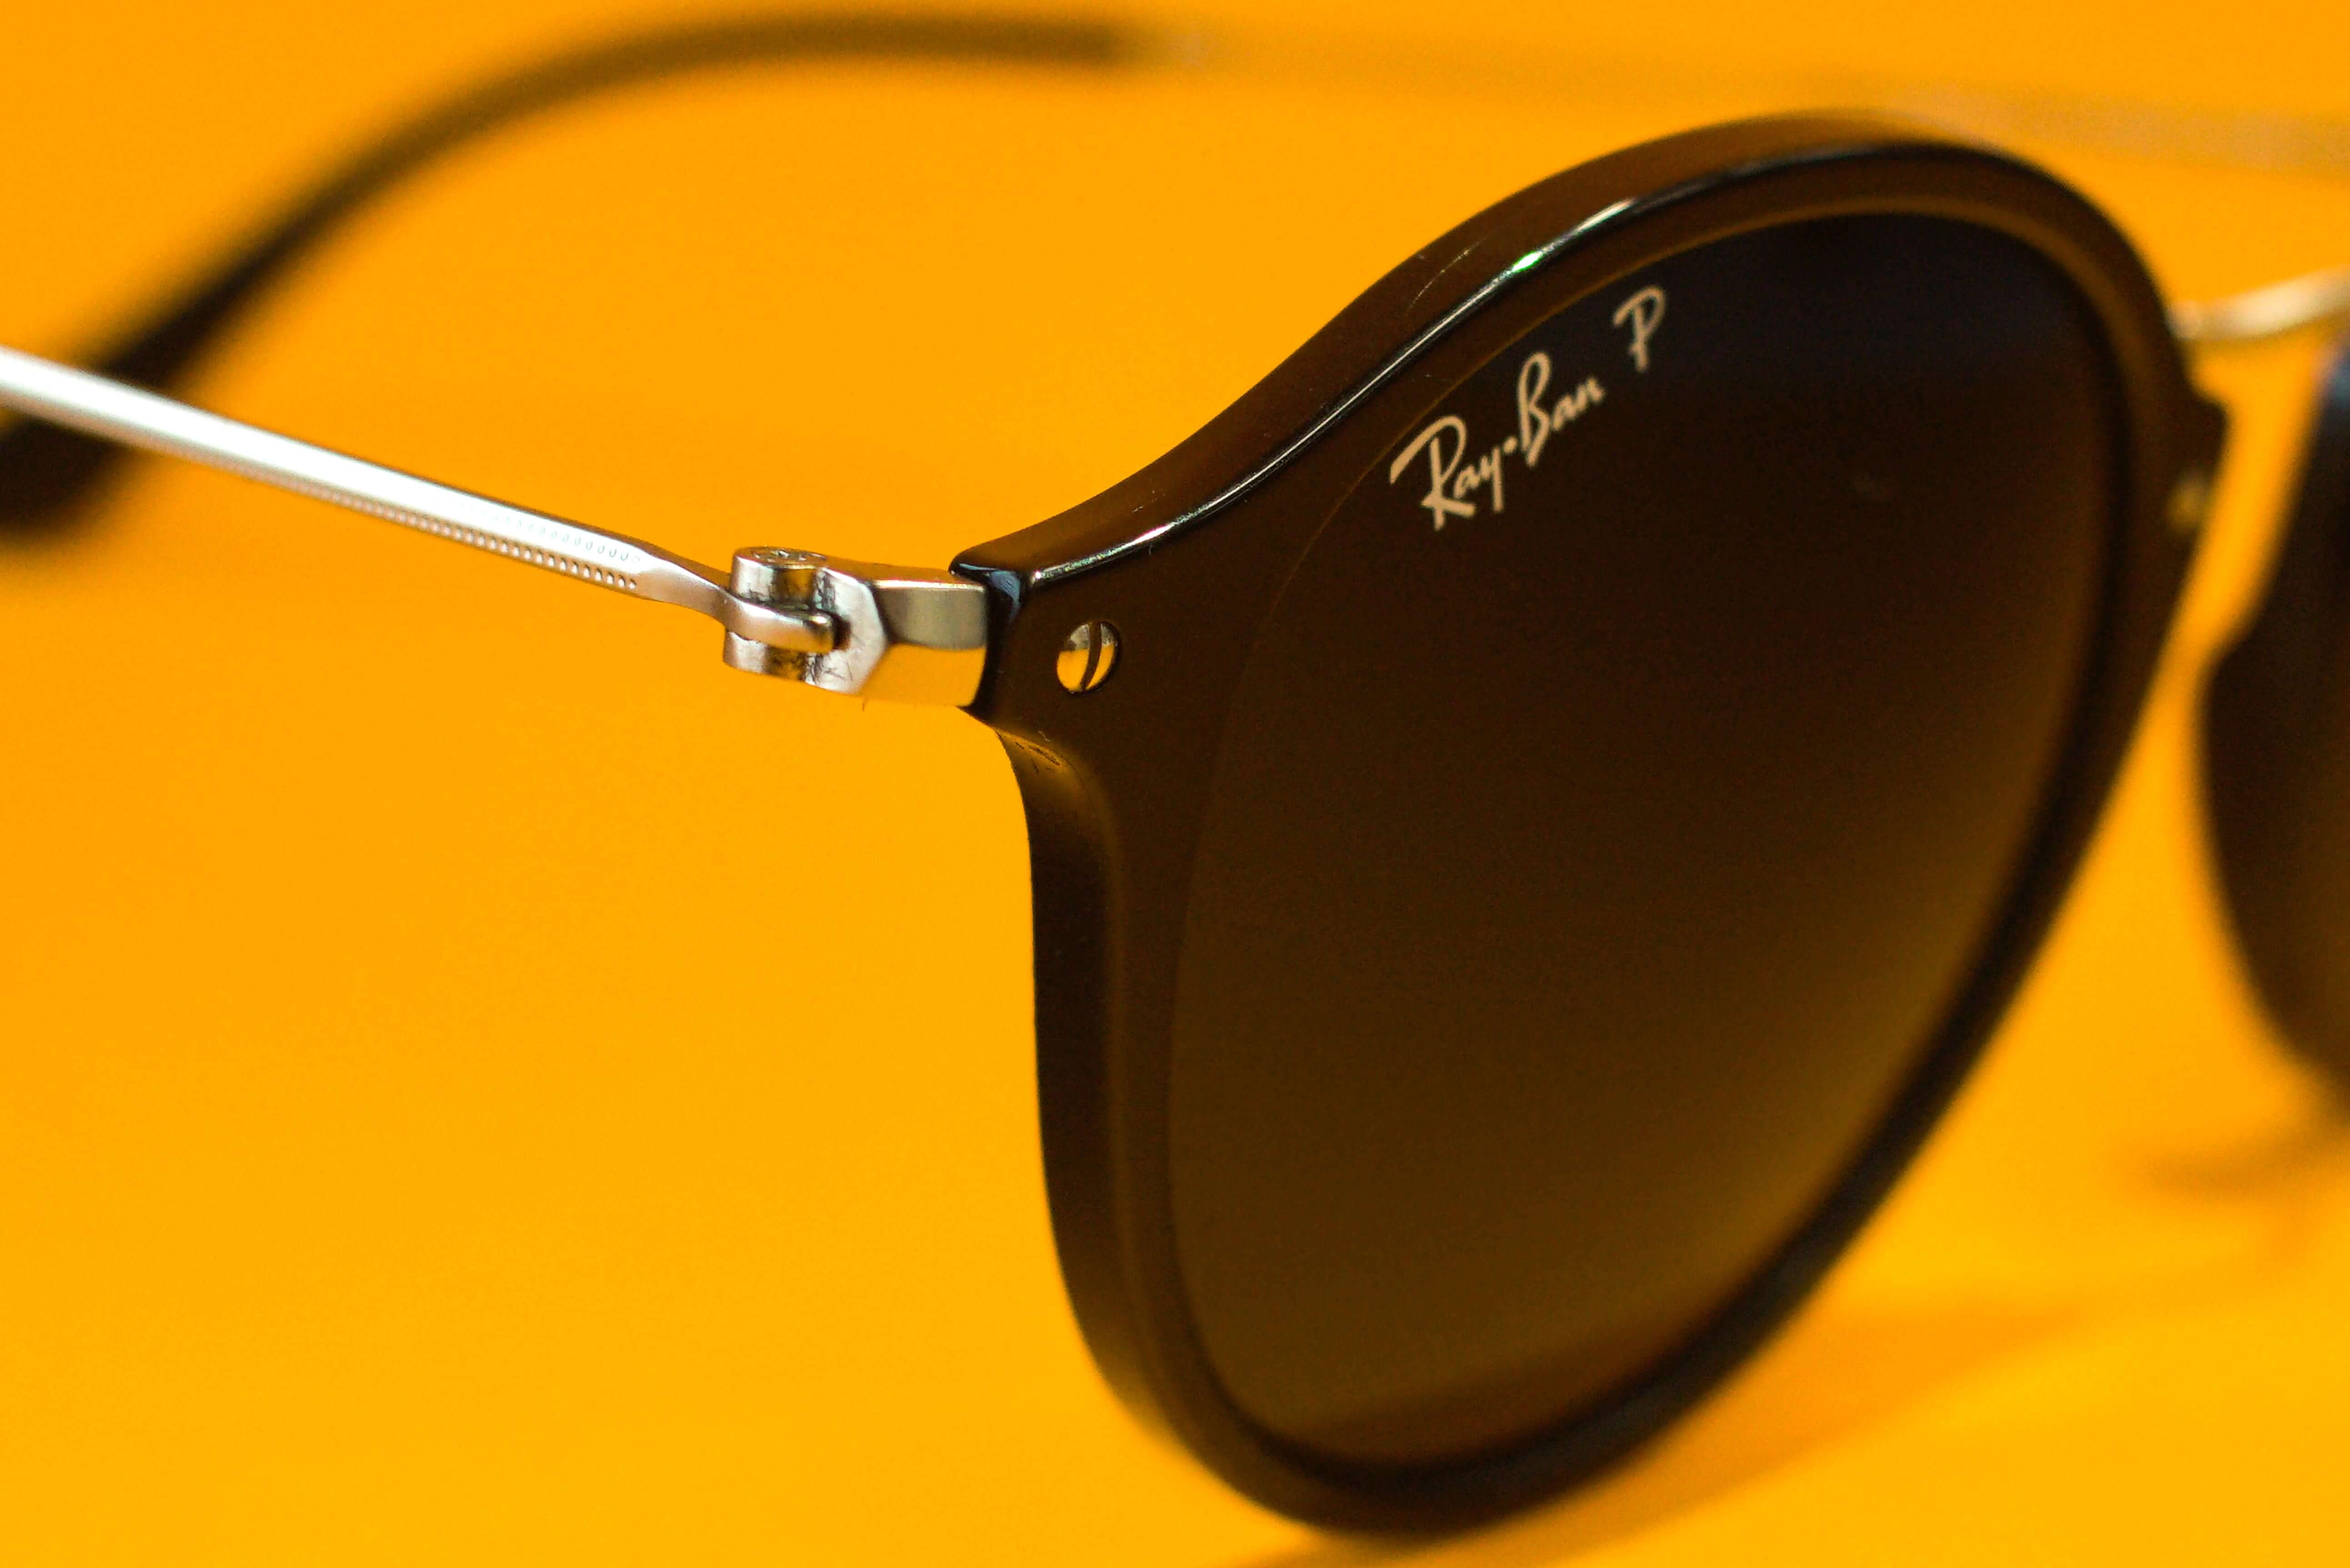 2019 ray ban sunglasses cheap price online 2019